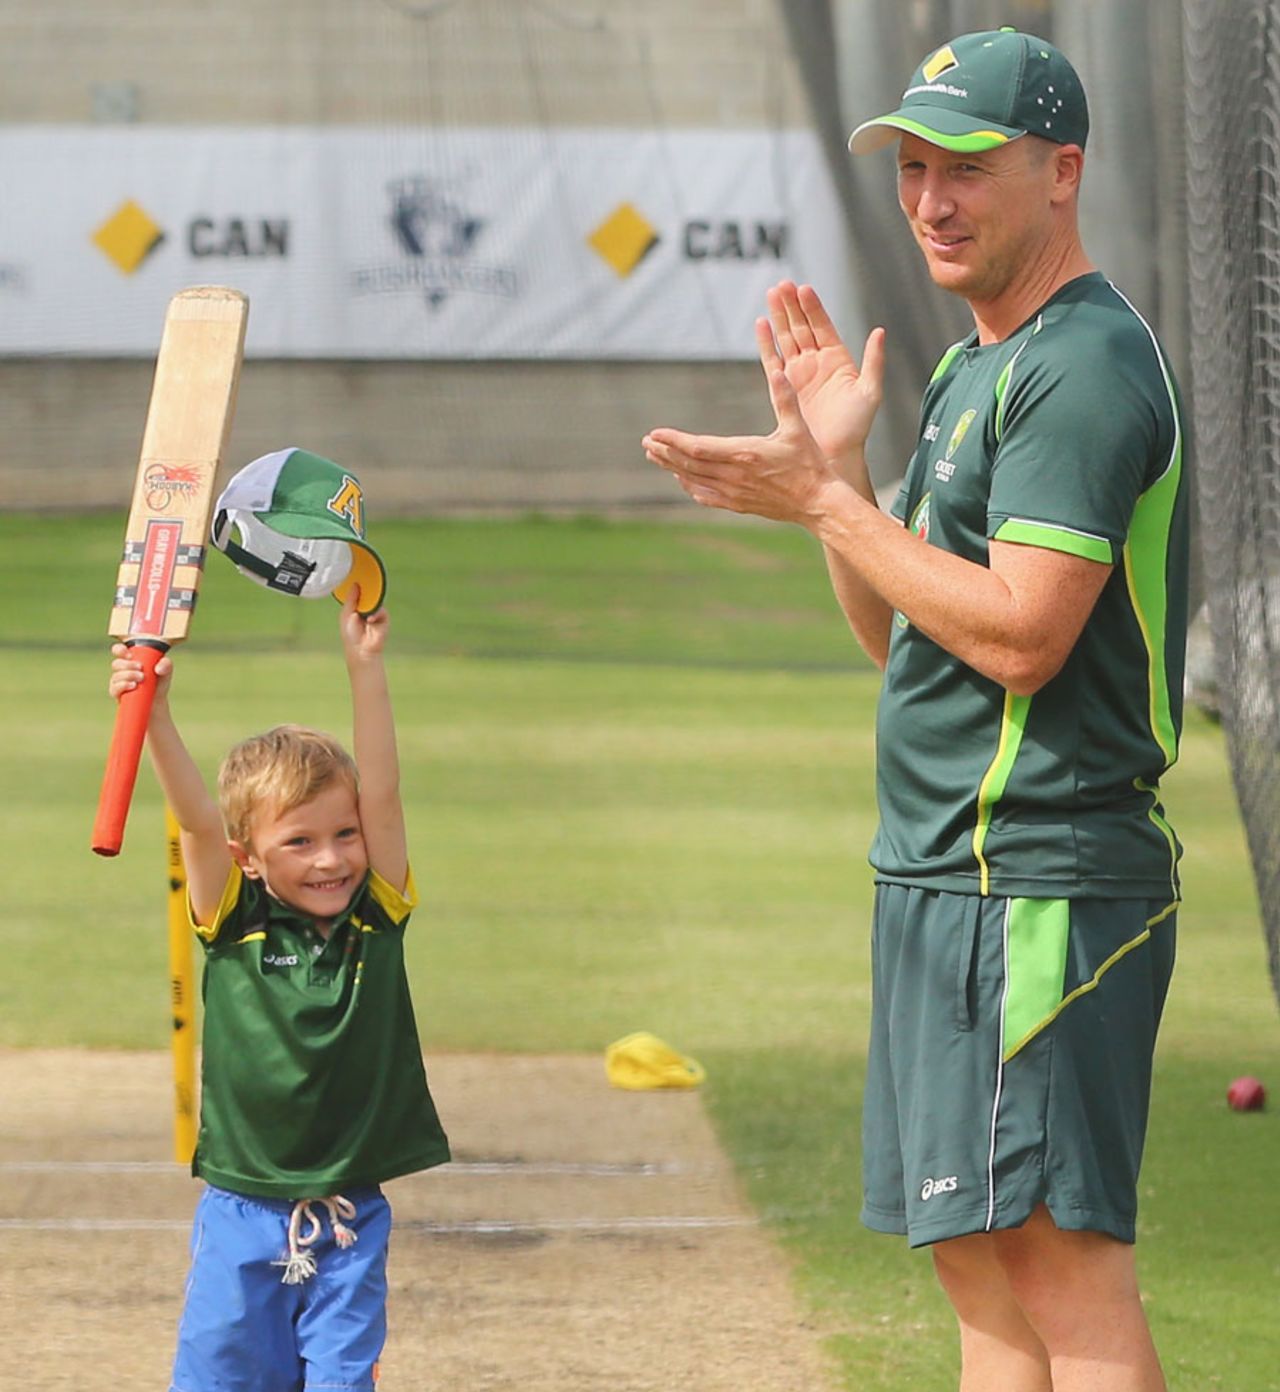 Brad Haddin applauds as his son, Zac, bats in the nets, Melbourne, December 25, 2013